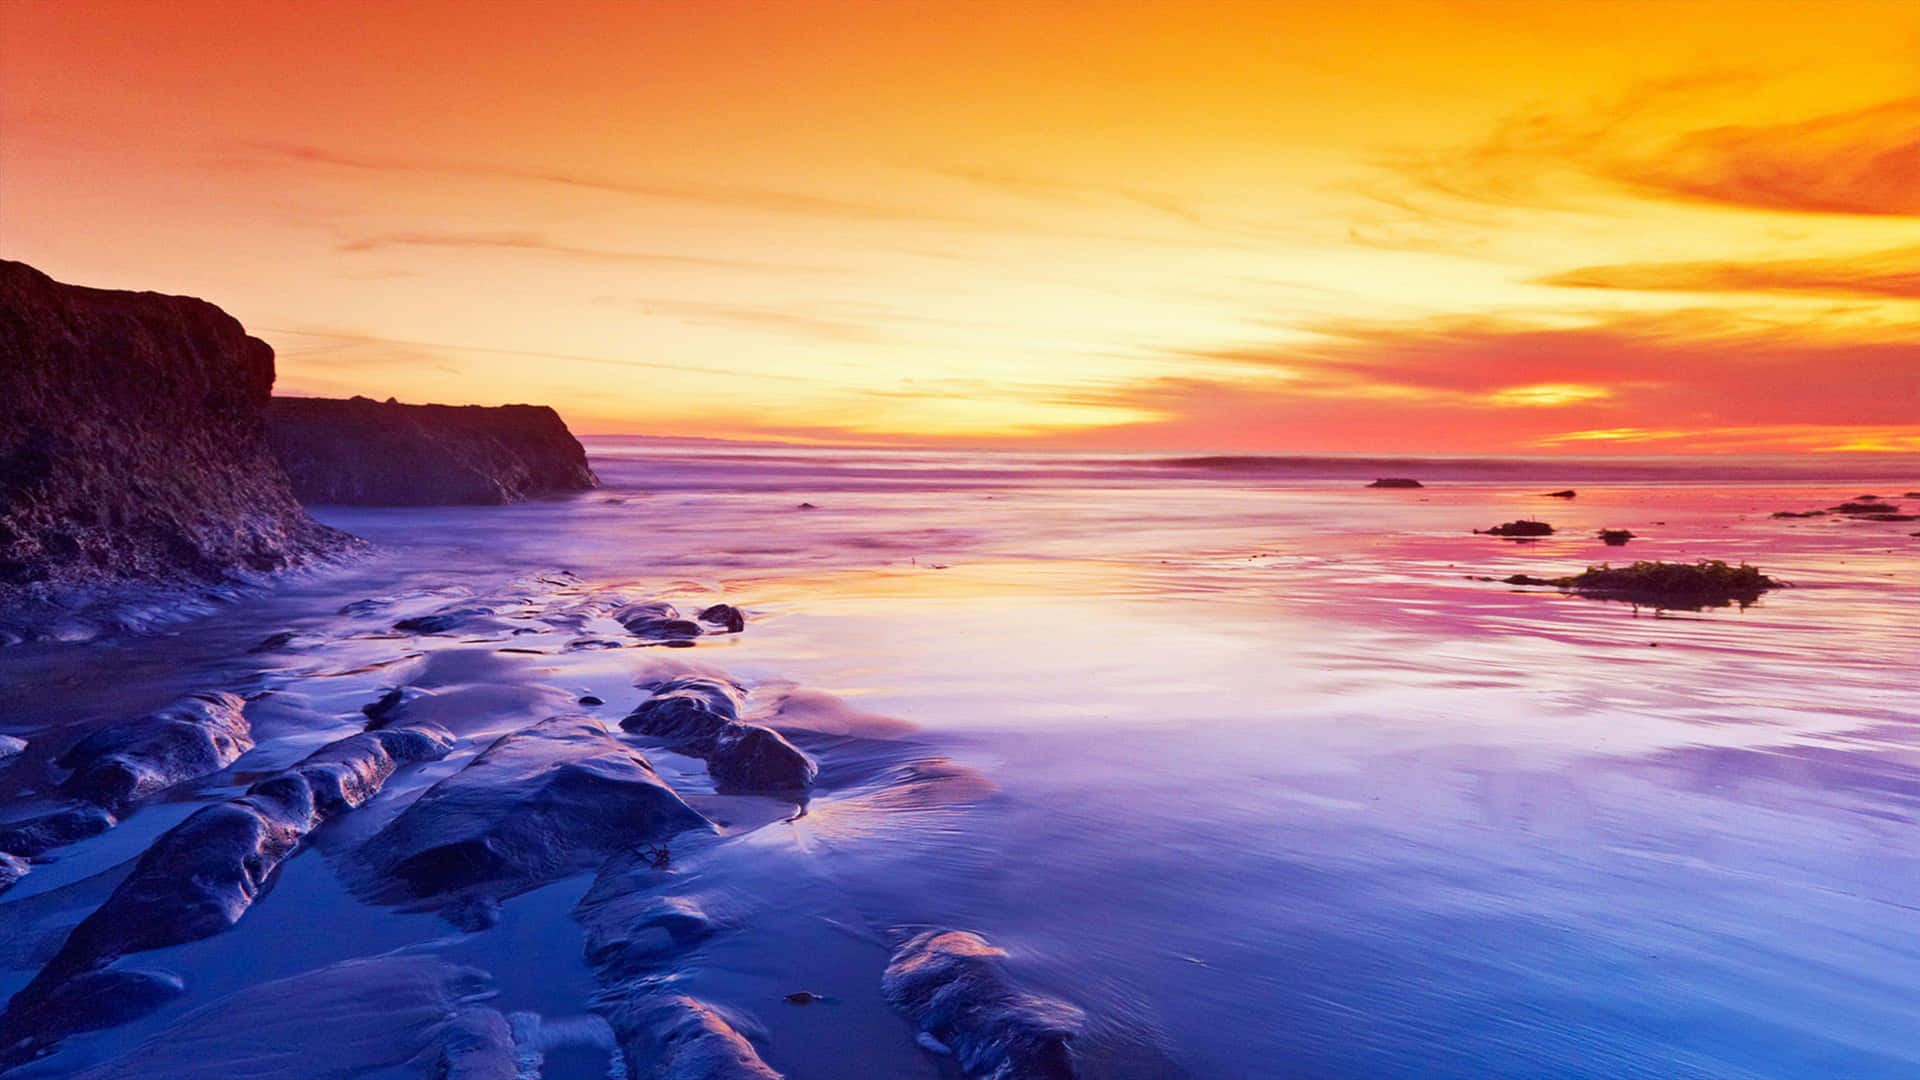 A Colorful Sunset Over The Ocean And Rocks Background